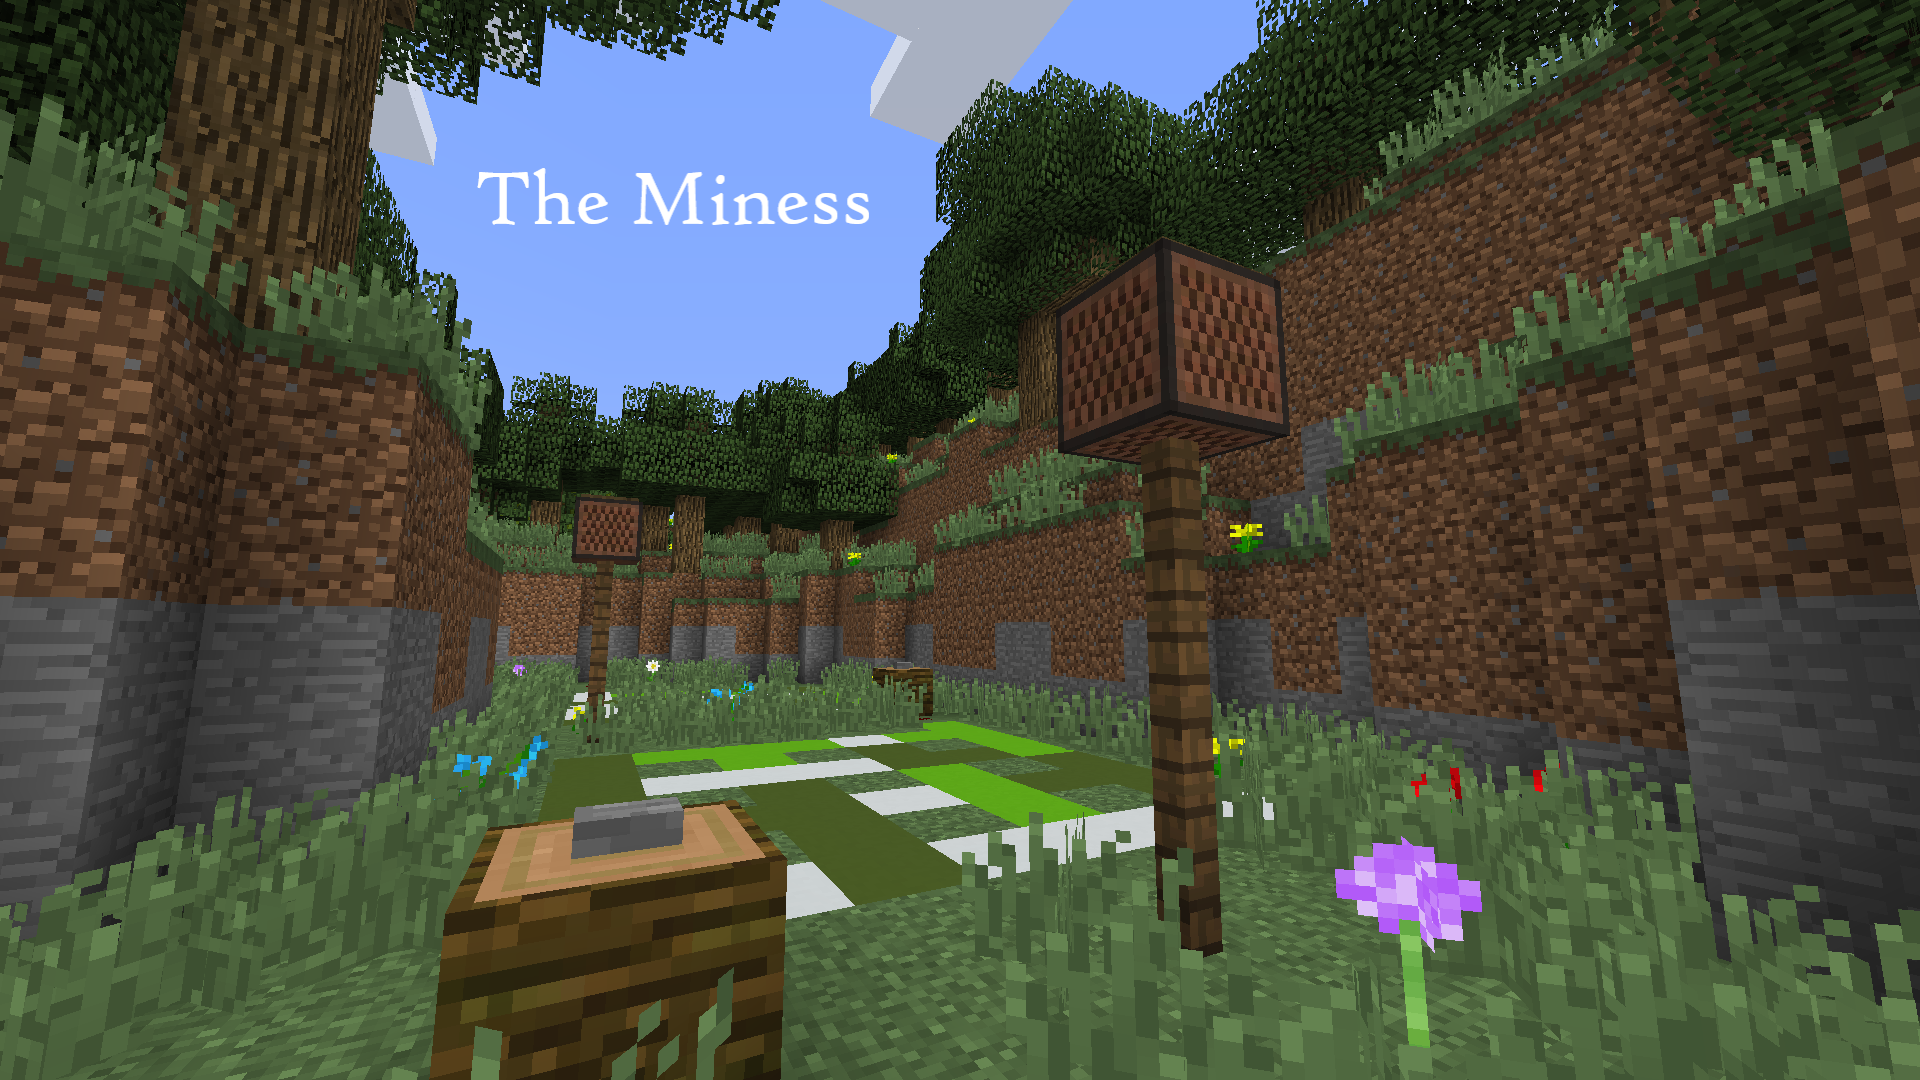 Download The Miness for Minecraft 1.12